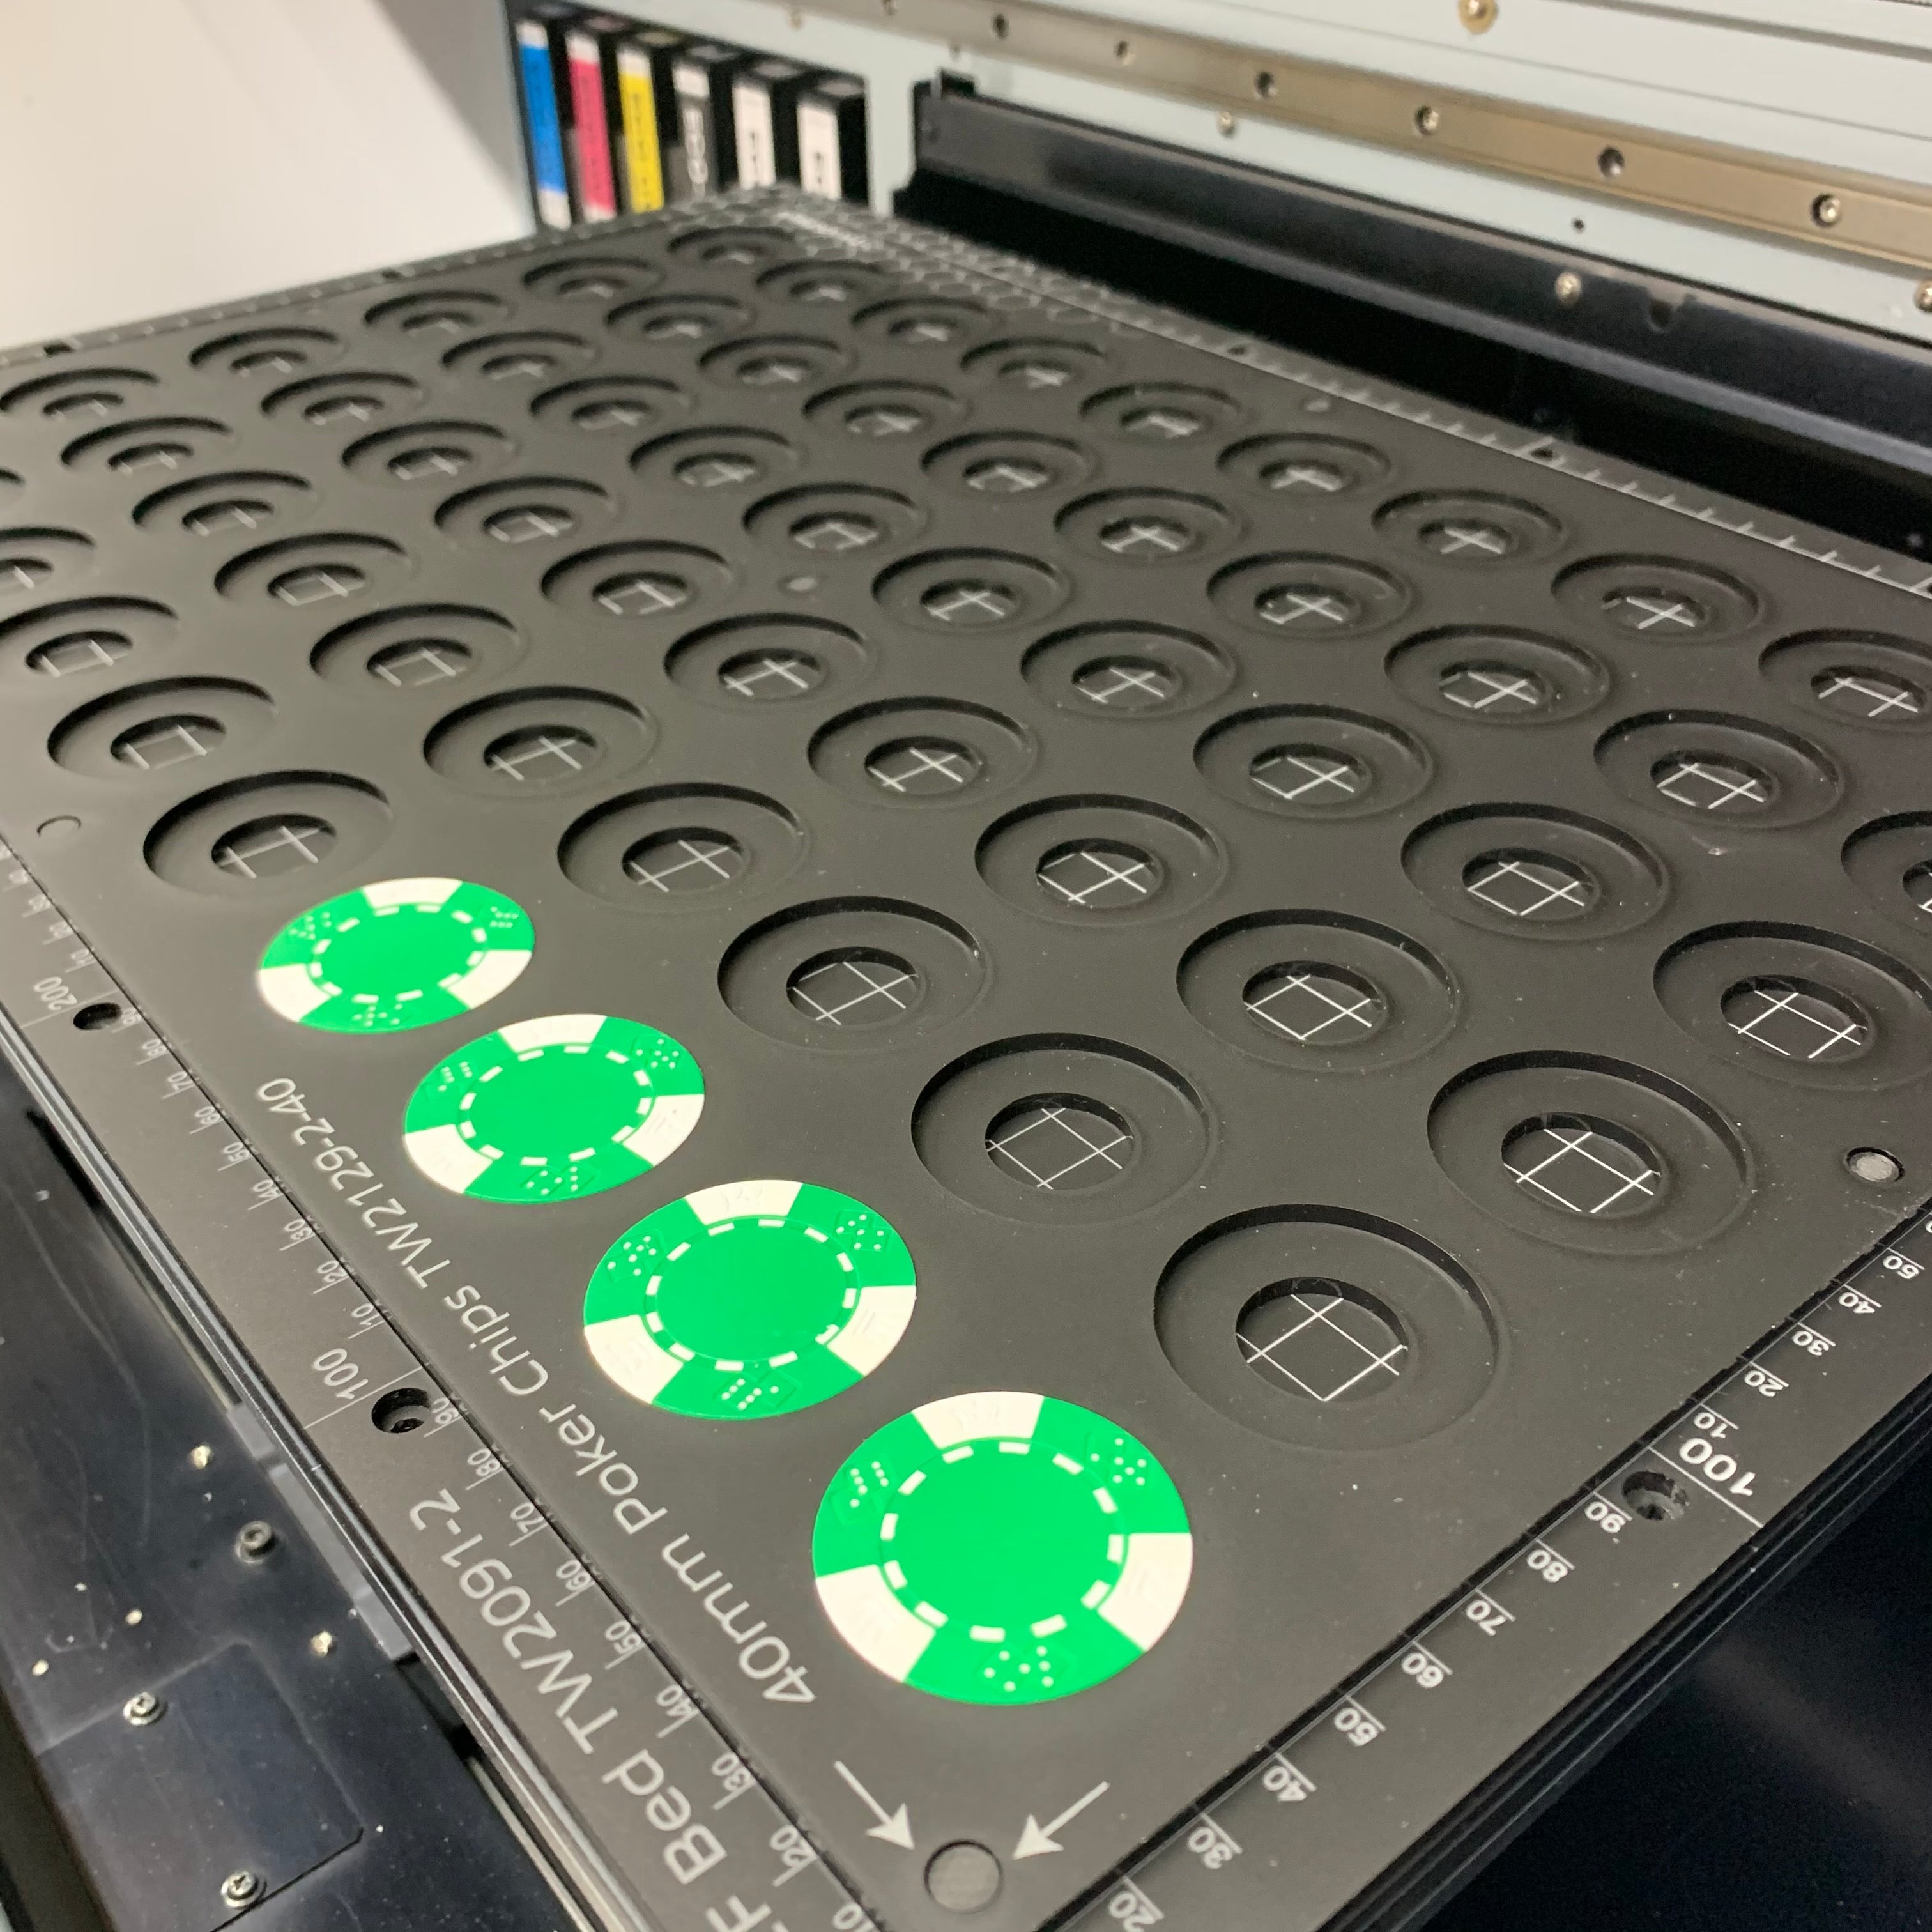 Poker Chip Printing Jig for 39mm / 40mm Poker Chips -Roland BD-8 Flatbed Printer (TBA Spaces)